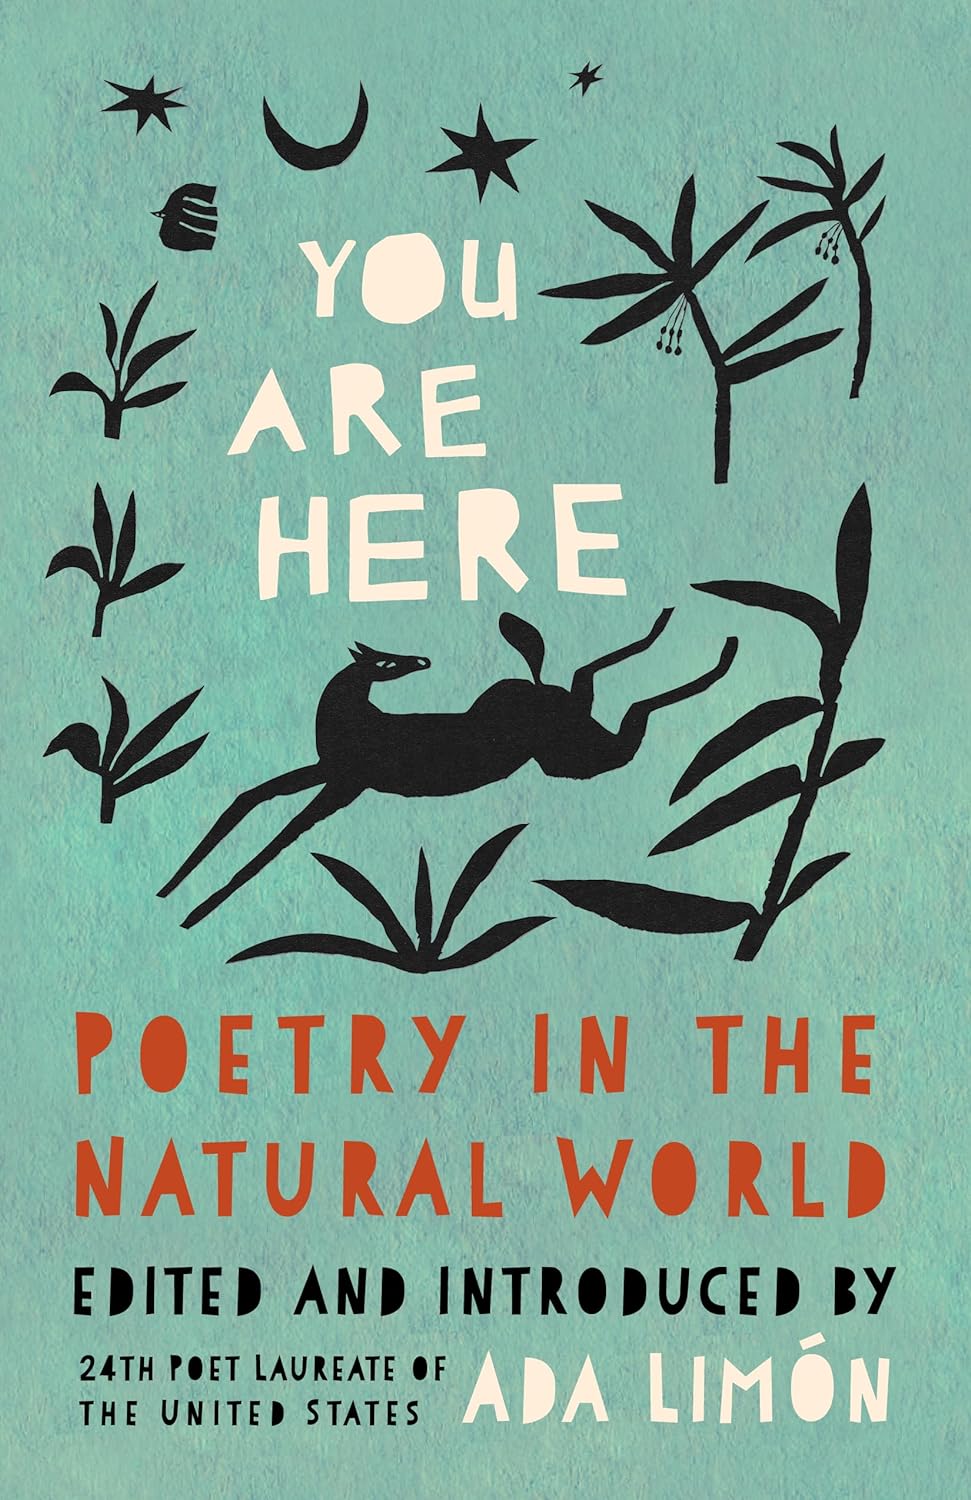 anthologies of poems about the natural world